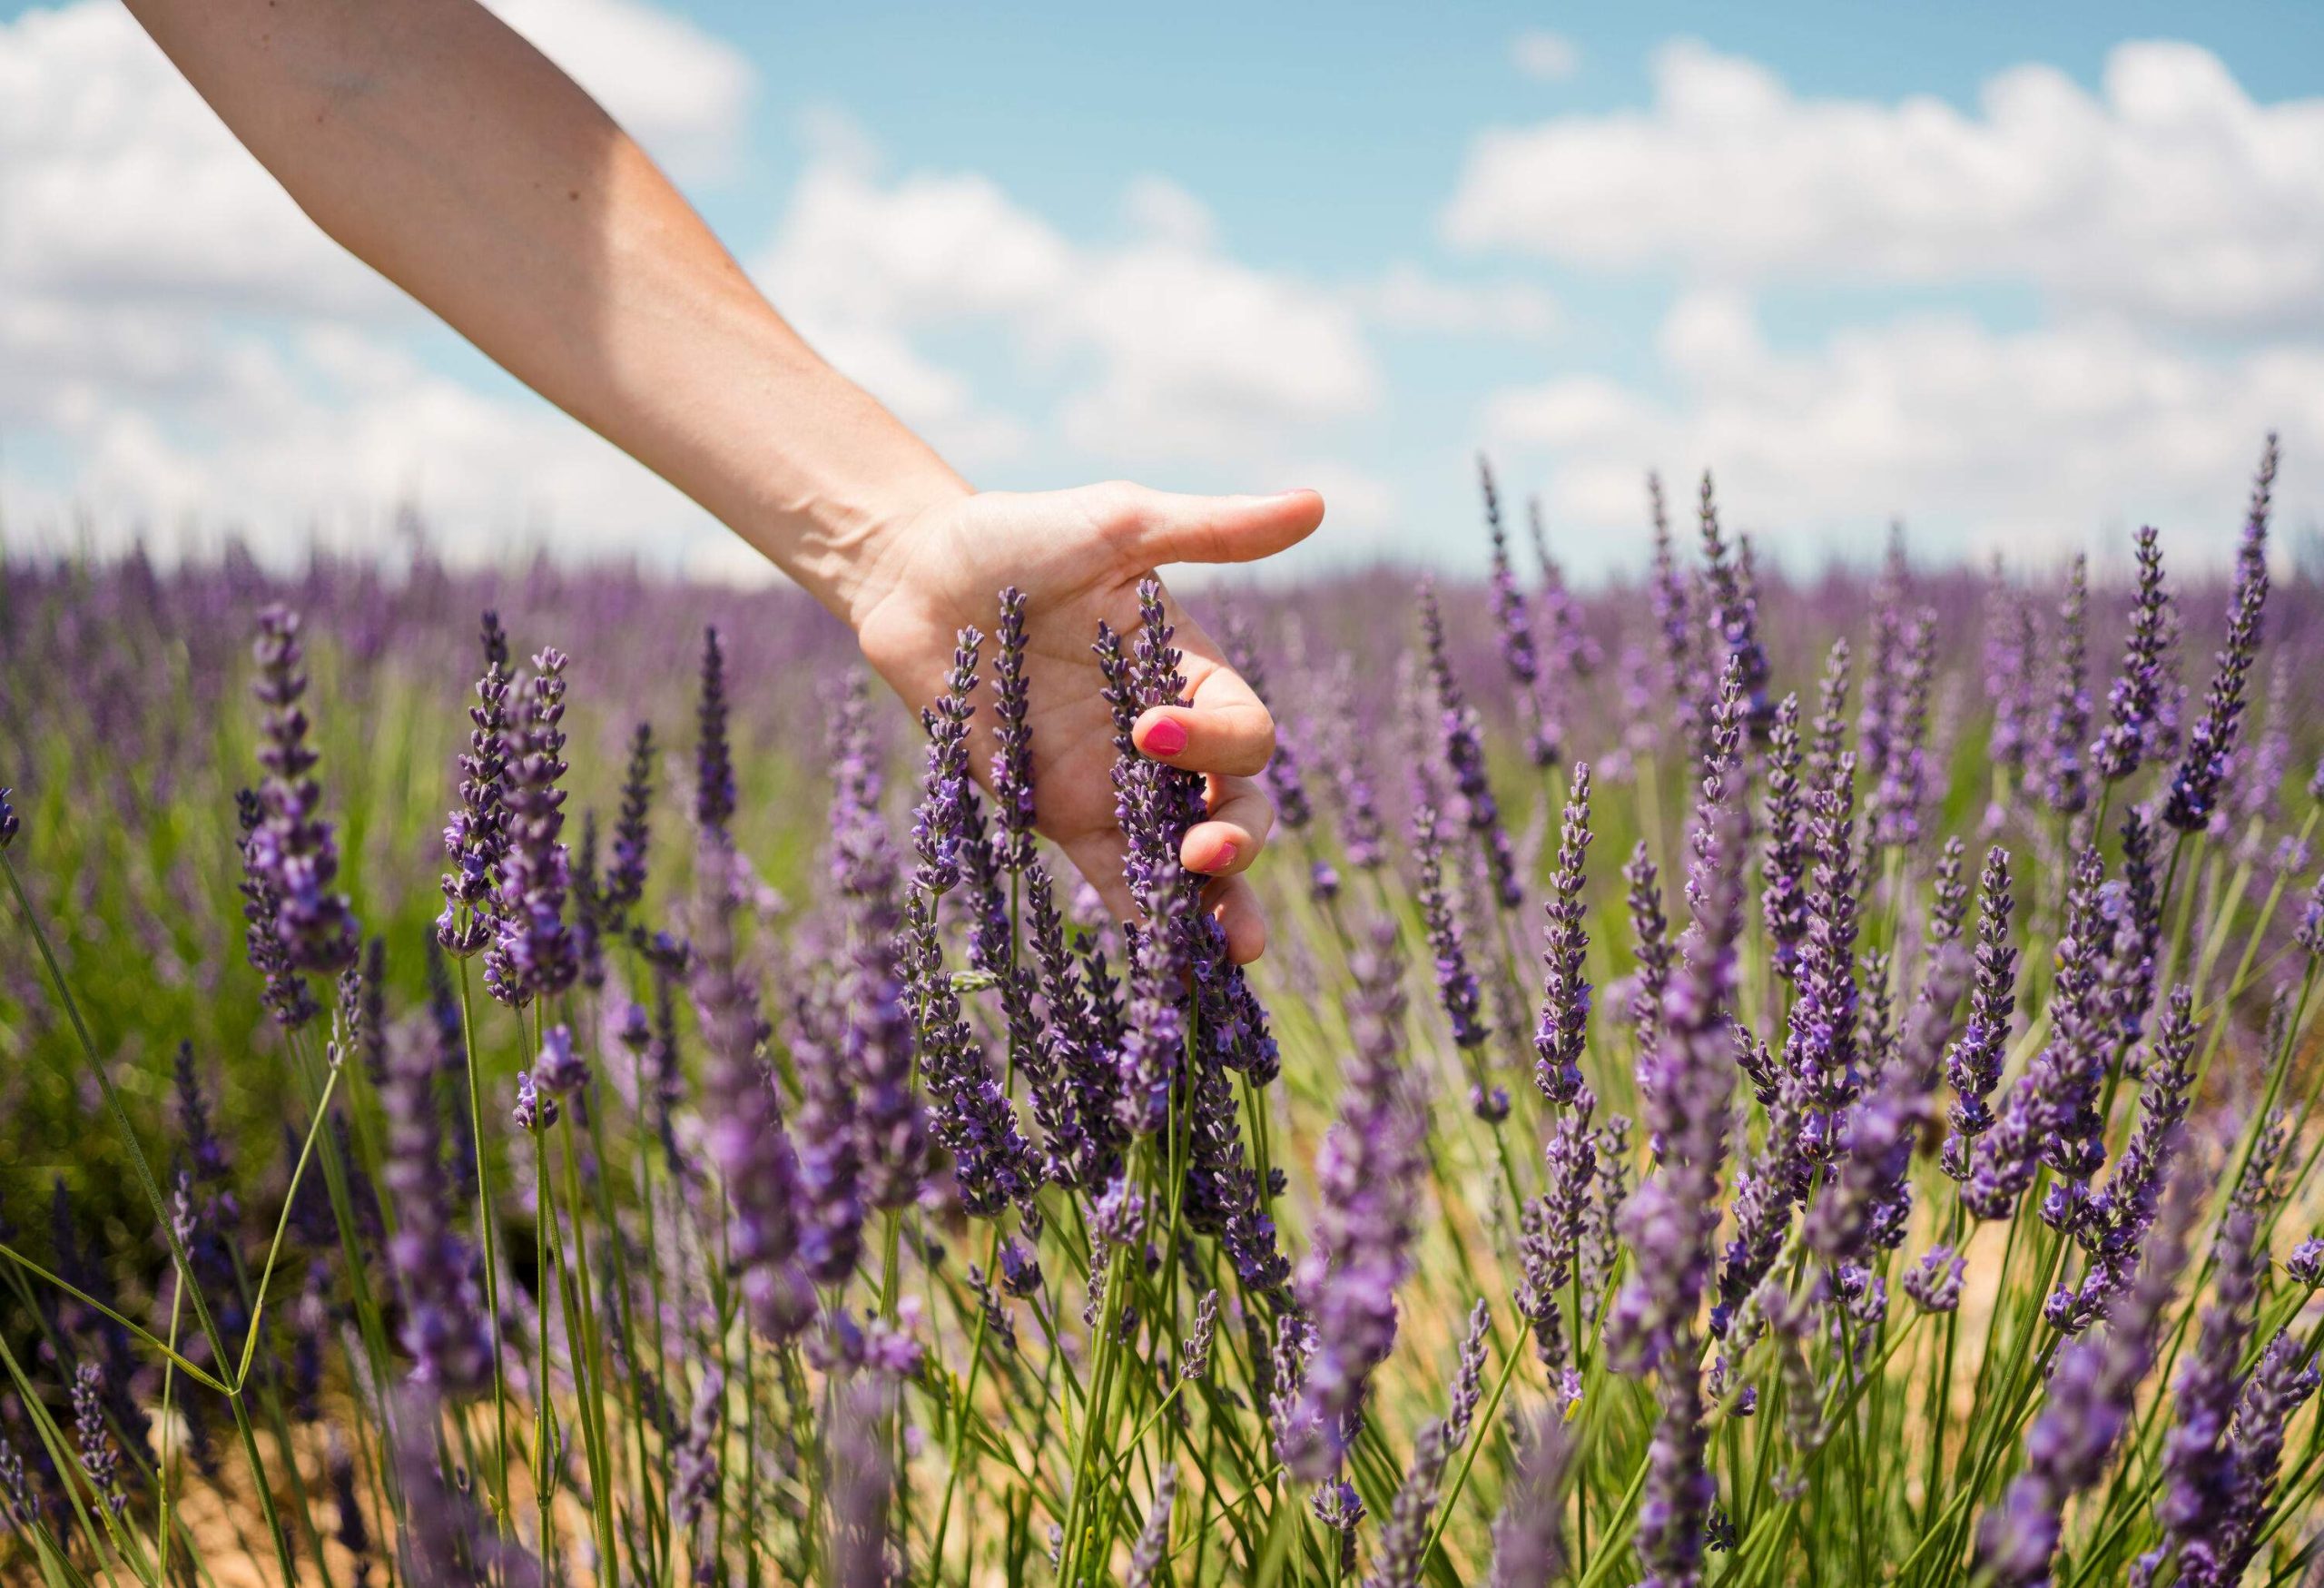 A hand reaches out to touch the lavenders in the field. 